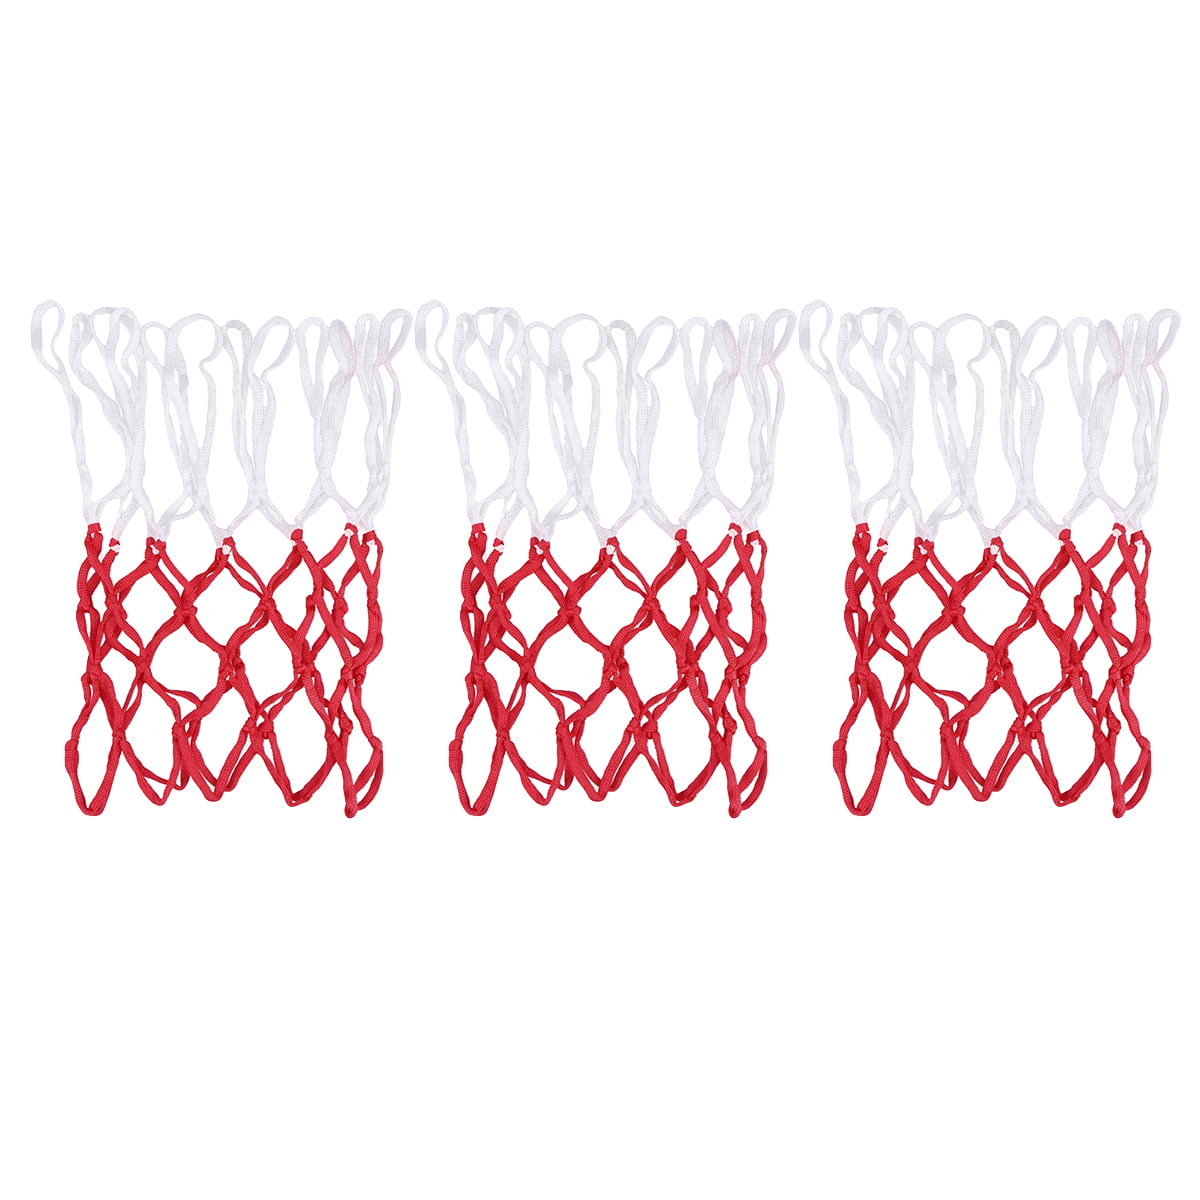 Standard Professional Polyester Braided Basketball Net for Outdoors Indoors 